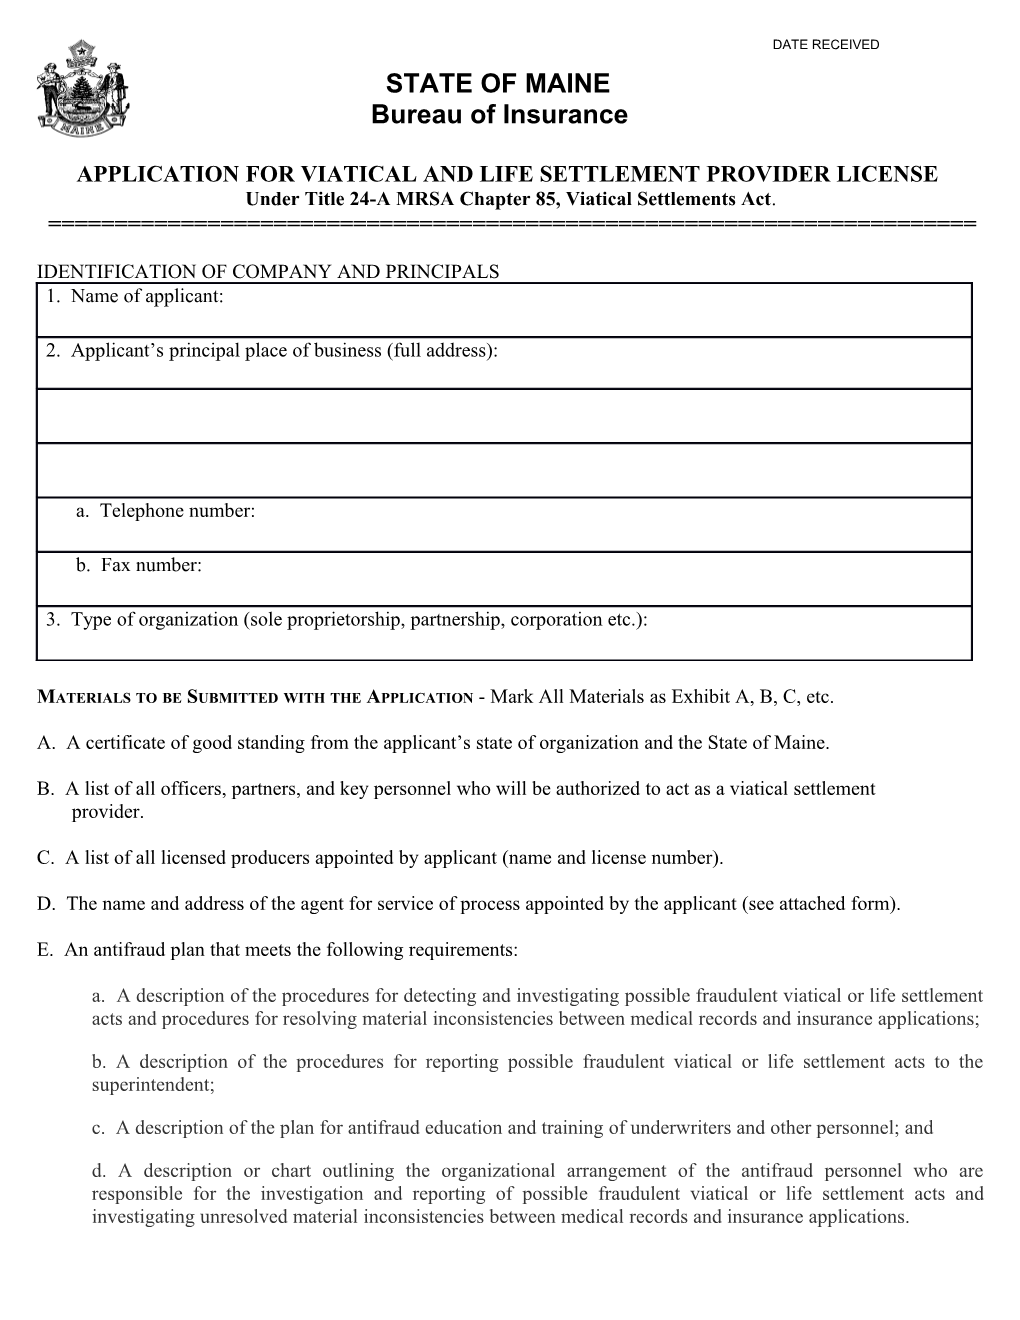 Application for Viatical and Life Settlement Provider License